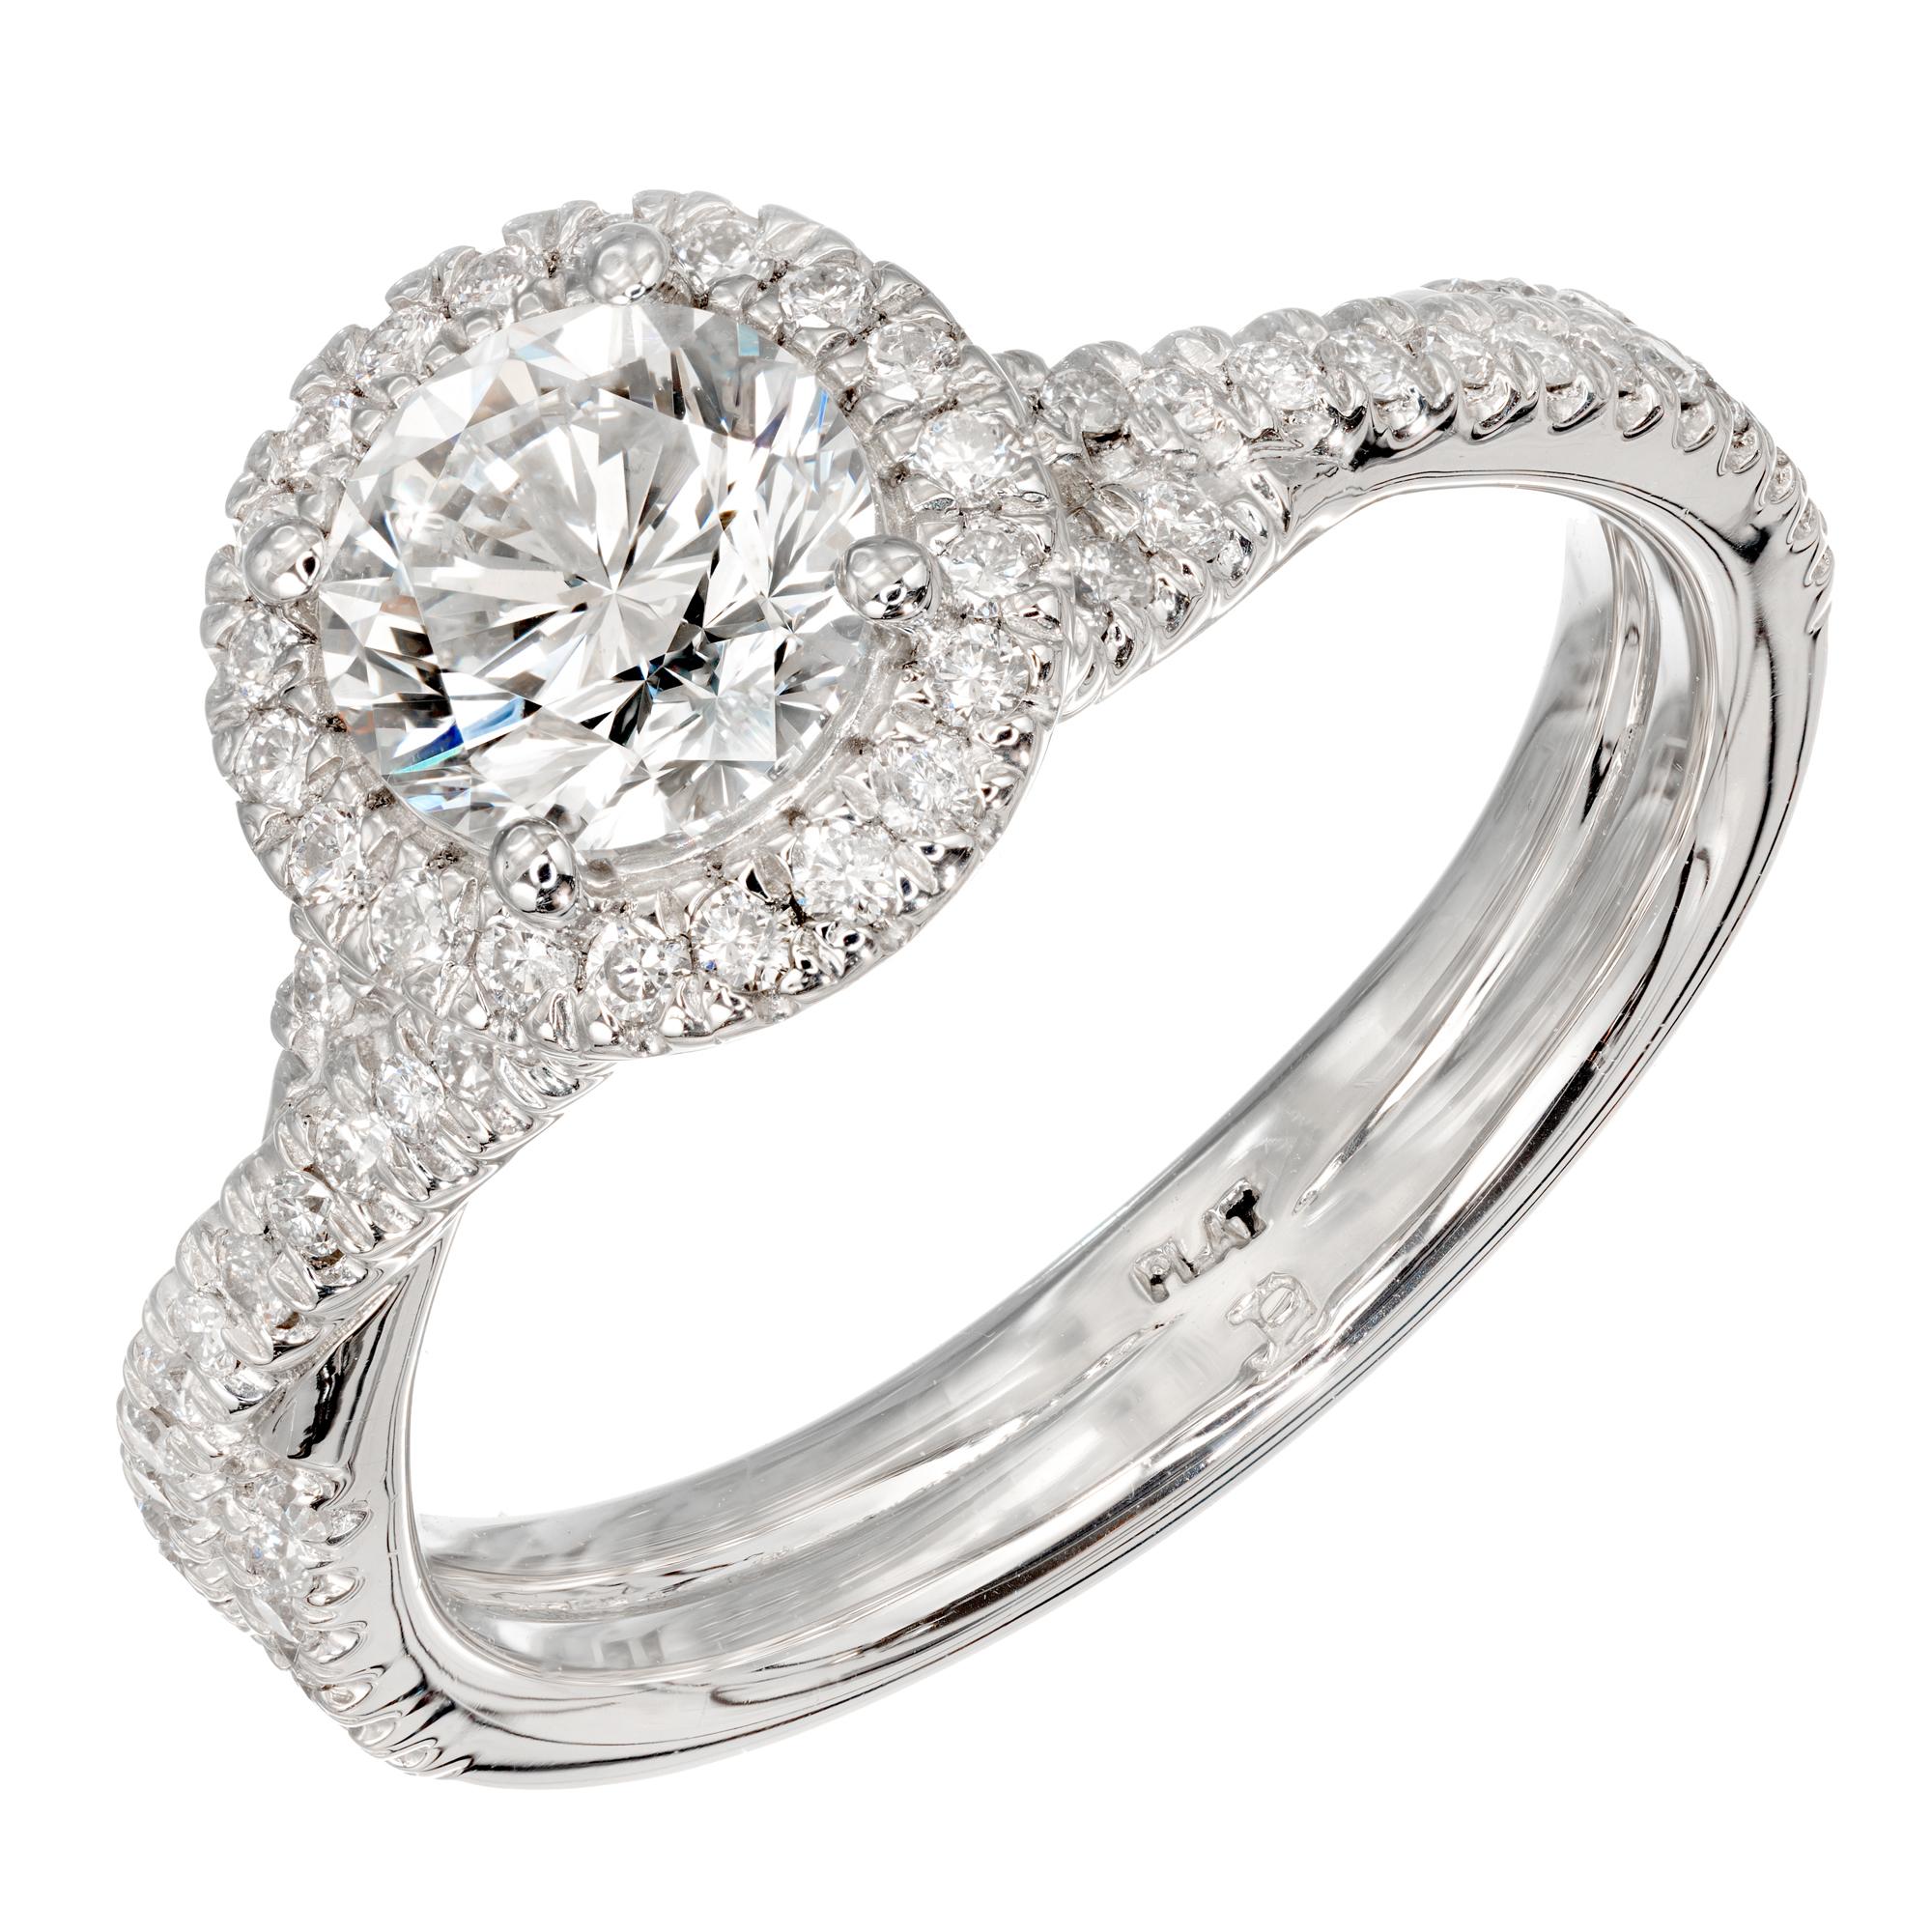 Crisscross style diamond halo engagement ring. Set with a bright sparkly transitional cut center diamond, from a 1940's estate. The platinum halo setting  has a crisscross micro pave diamond shank that allows a wedding band to sit flush against it.